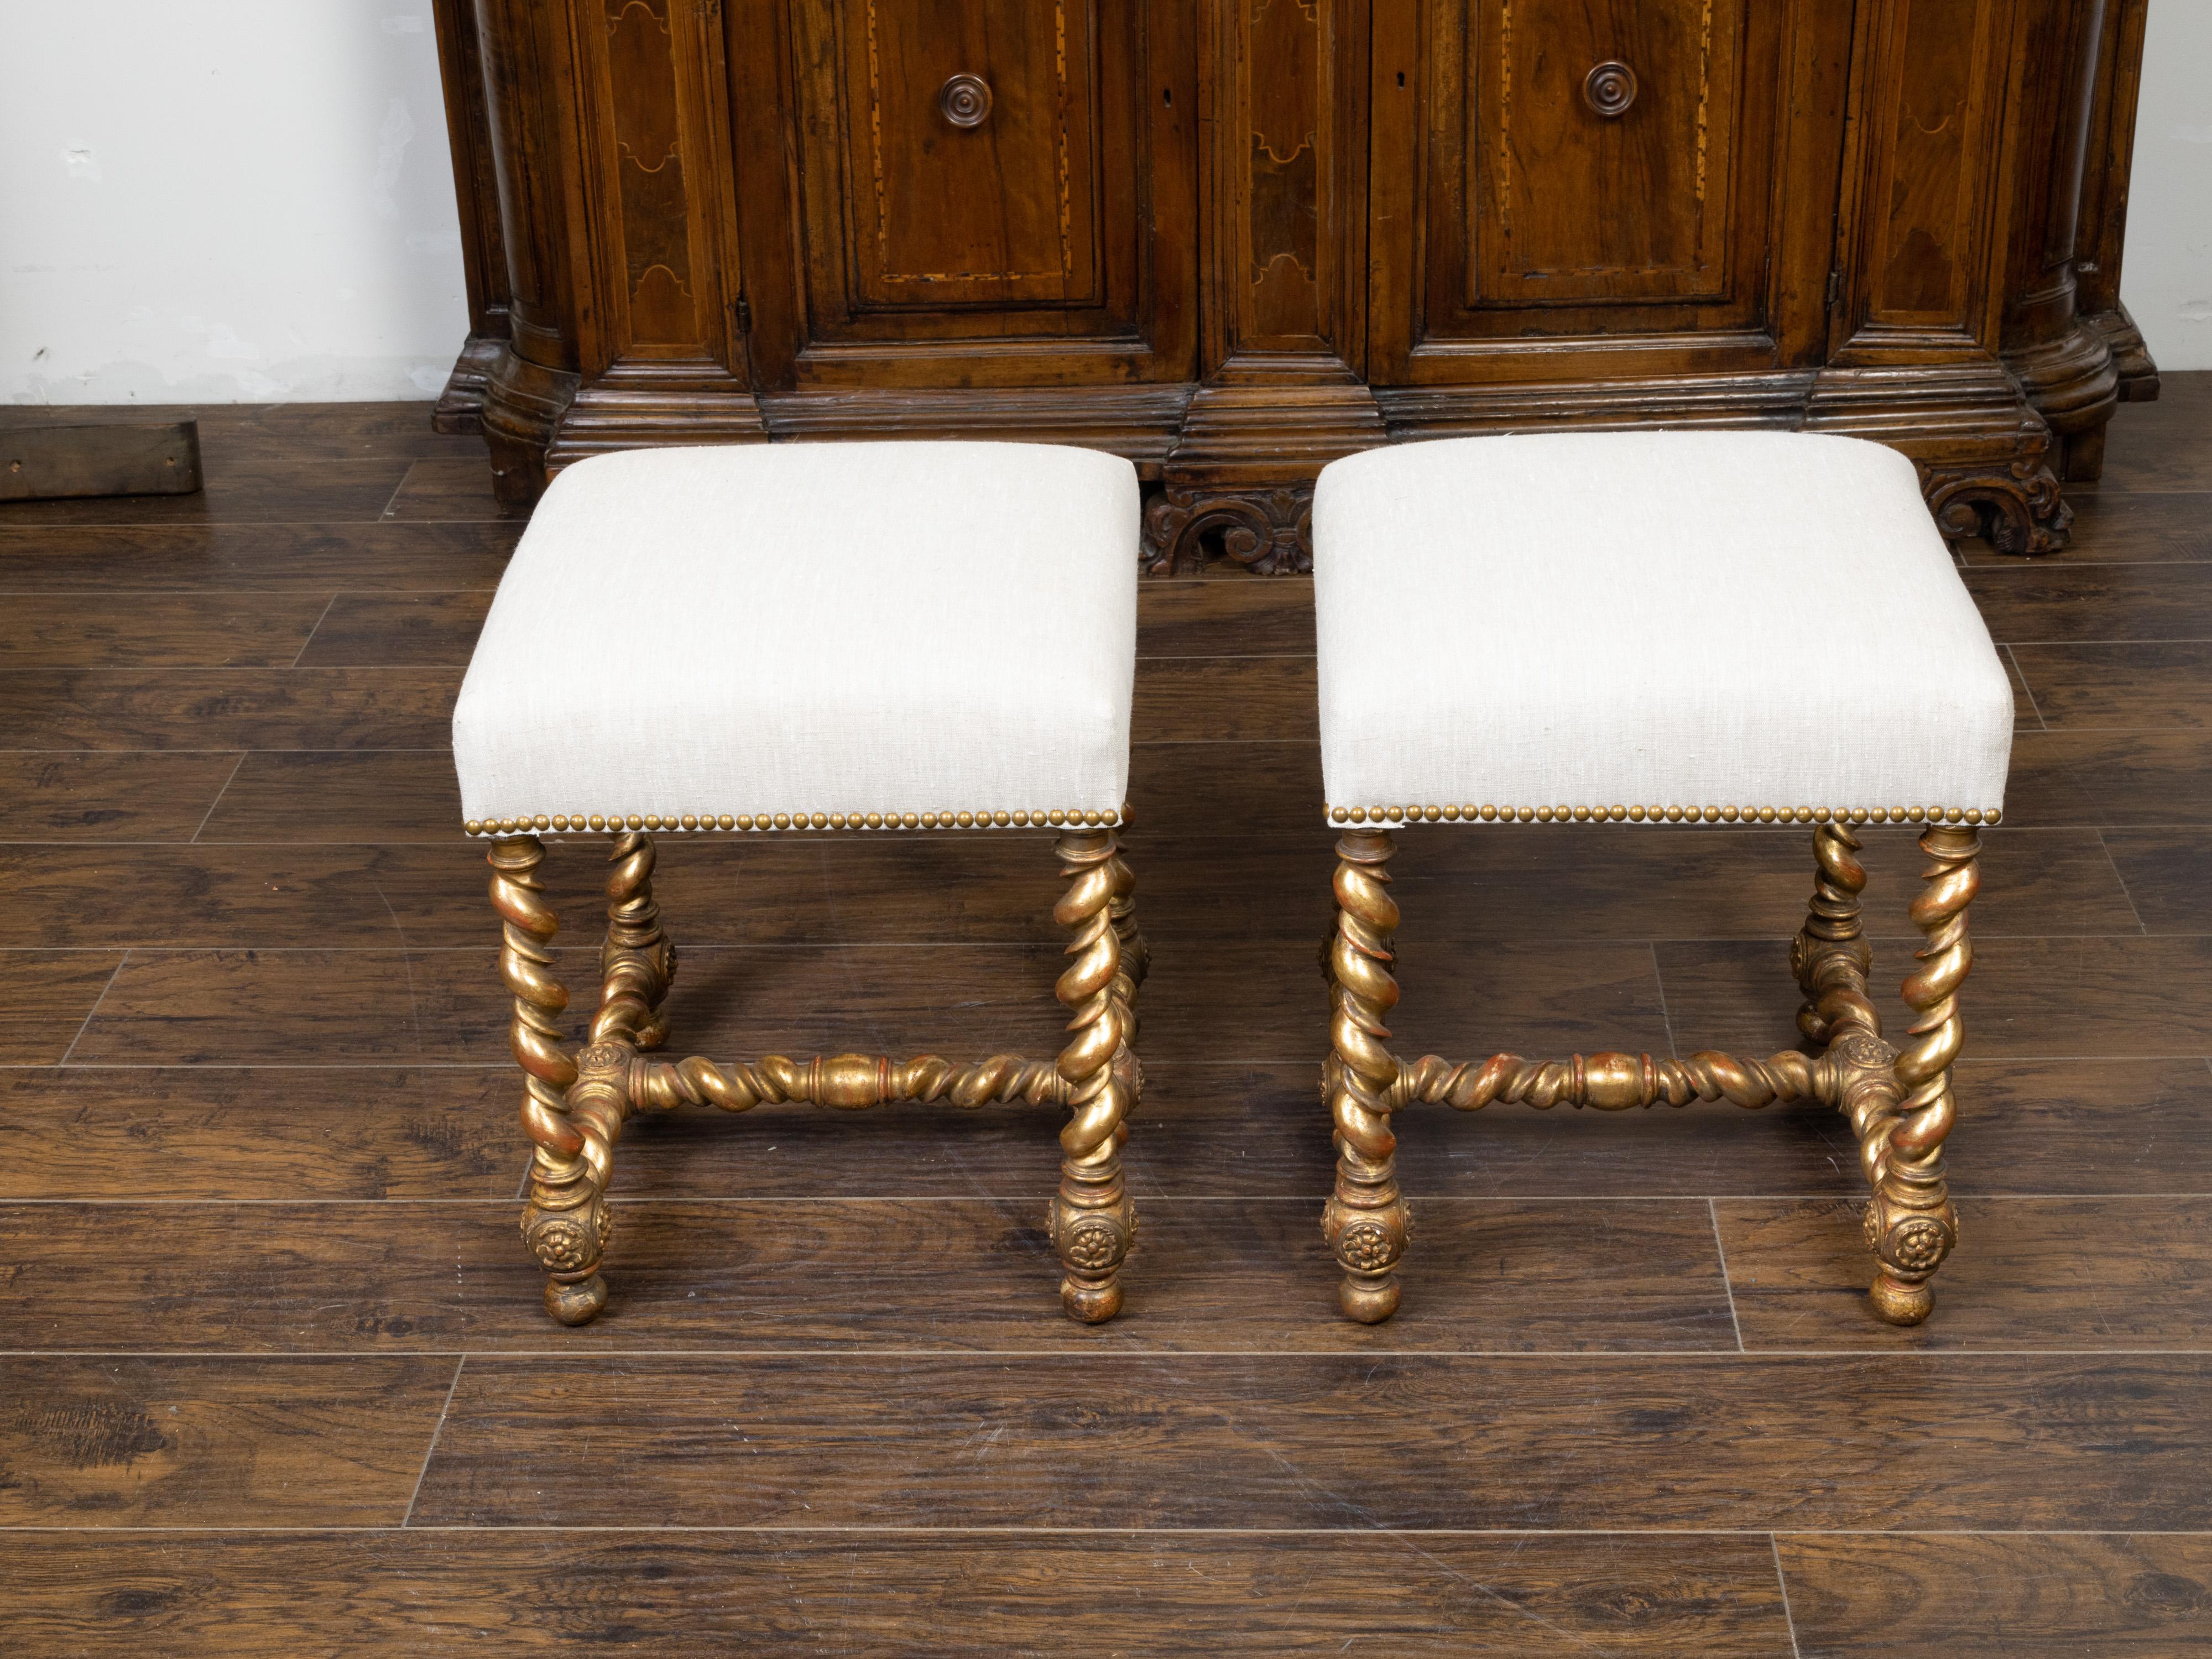 A pair of English giltwood barley twist stools from the late 19th century, with new upholstery. Created in England during the last quarter of the 19th century, each of this pair of stools features a square top newly reupholstered with a neutral